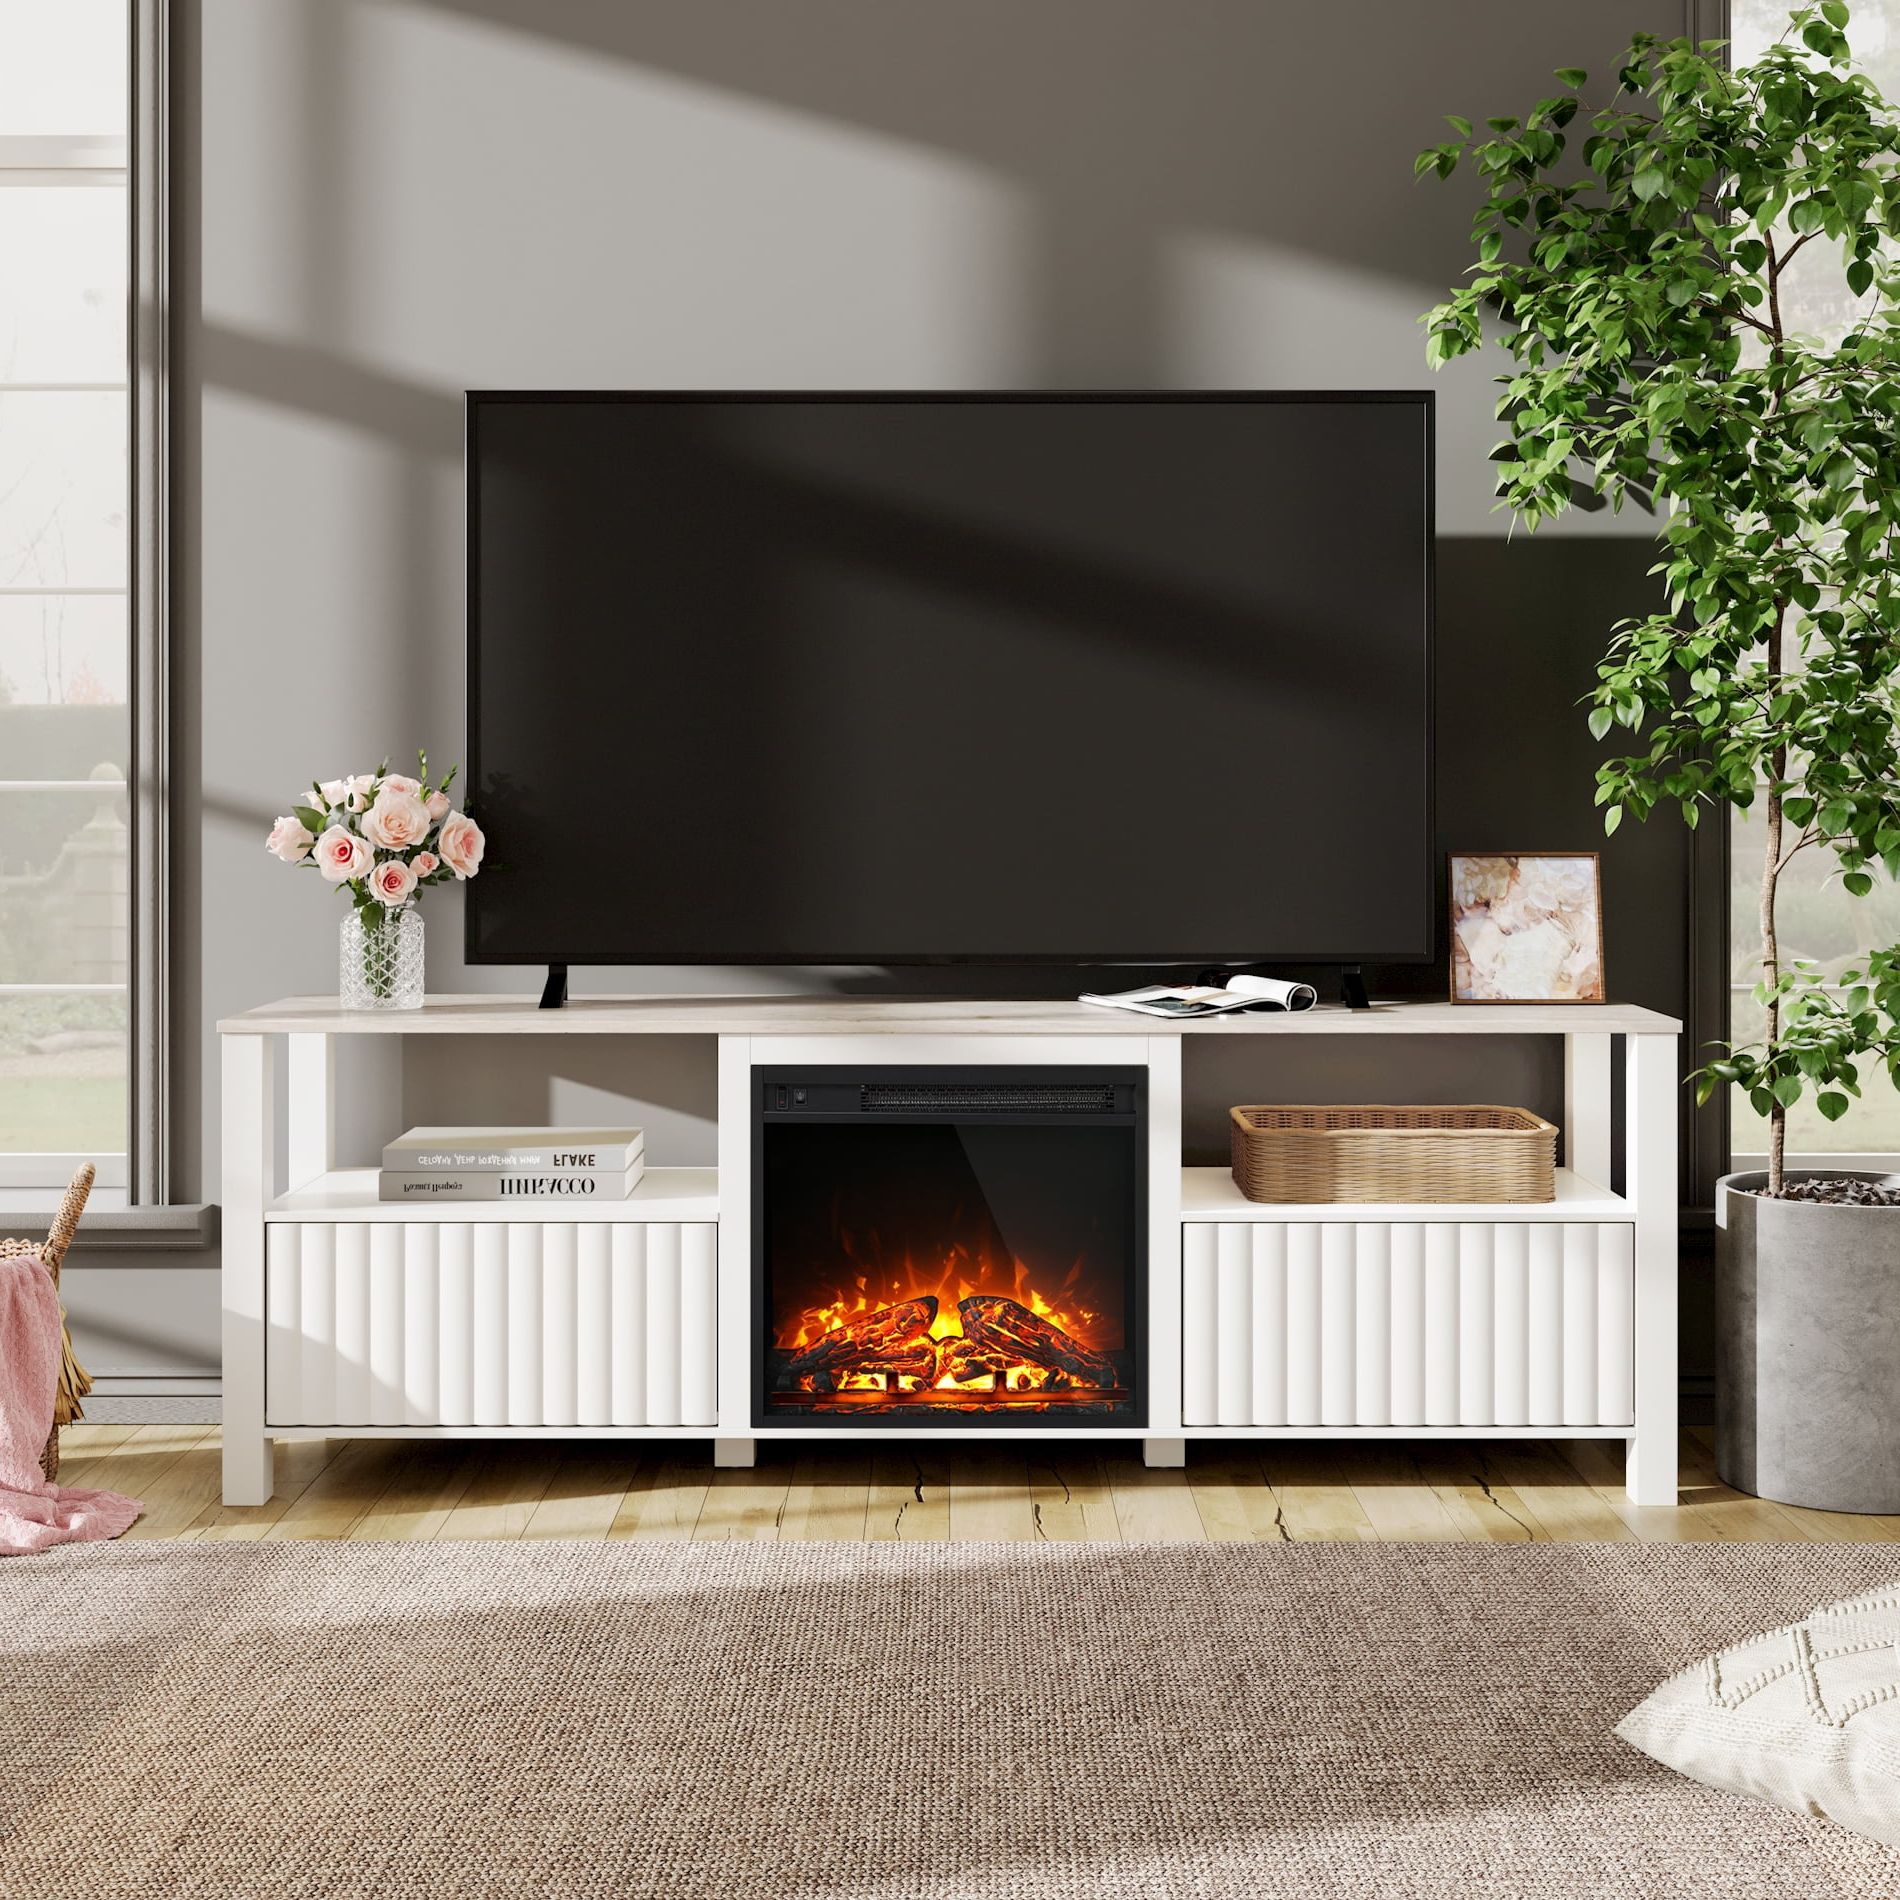 Fireplace Tv Stand For Tv's Up To 75 Inch, White Led Entertainment Center  For 80 Inch Tv With Electric Fireplace For Living Room Bedroom, 70 Inch –  Walmart In White Tv Stands Entertainment Center (Gallery 12 of 20)